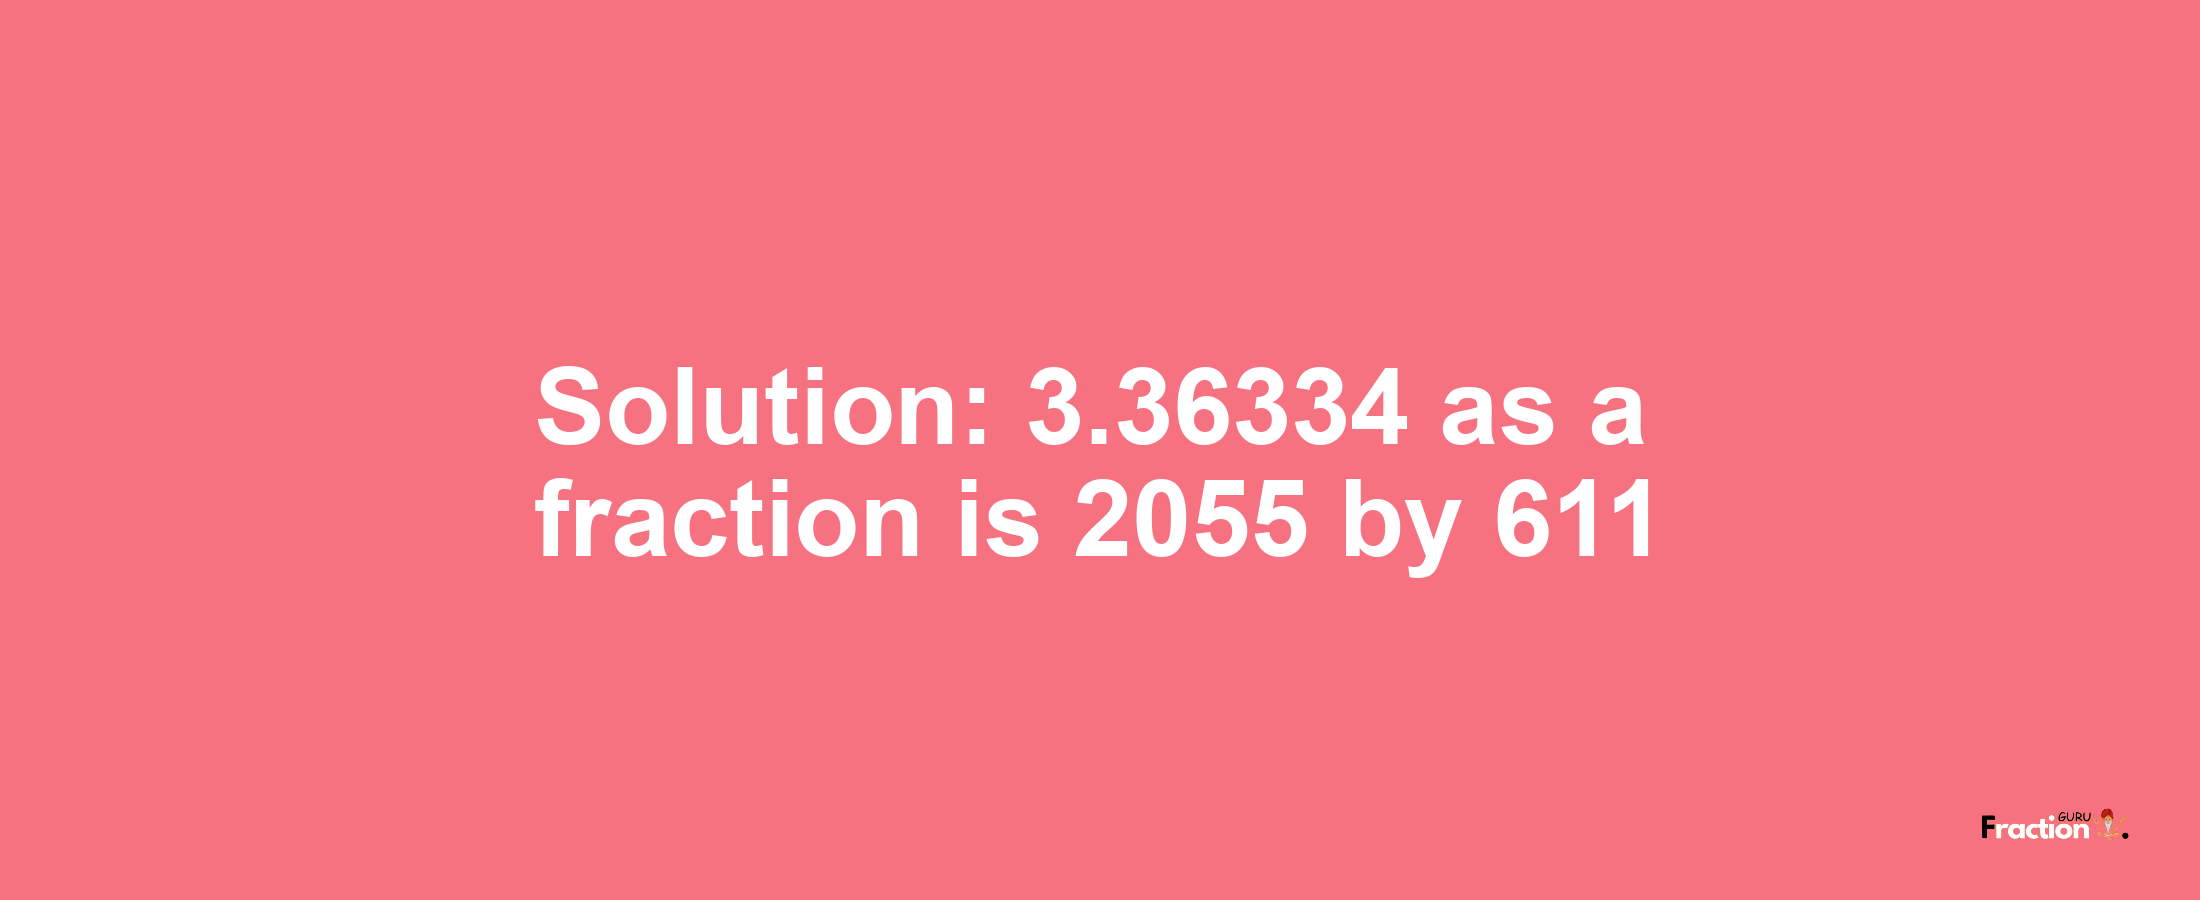 Solution:3.36334 as a fraction is 2055/611